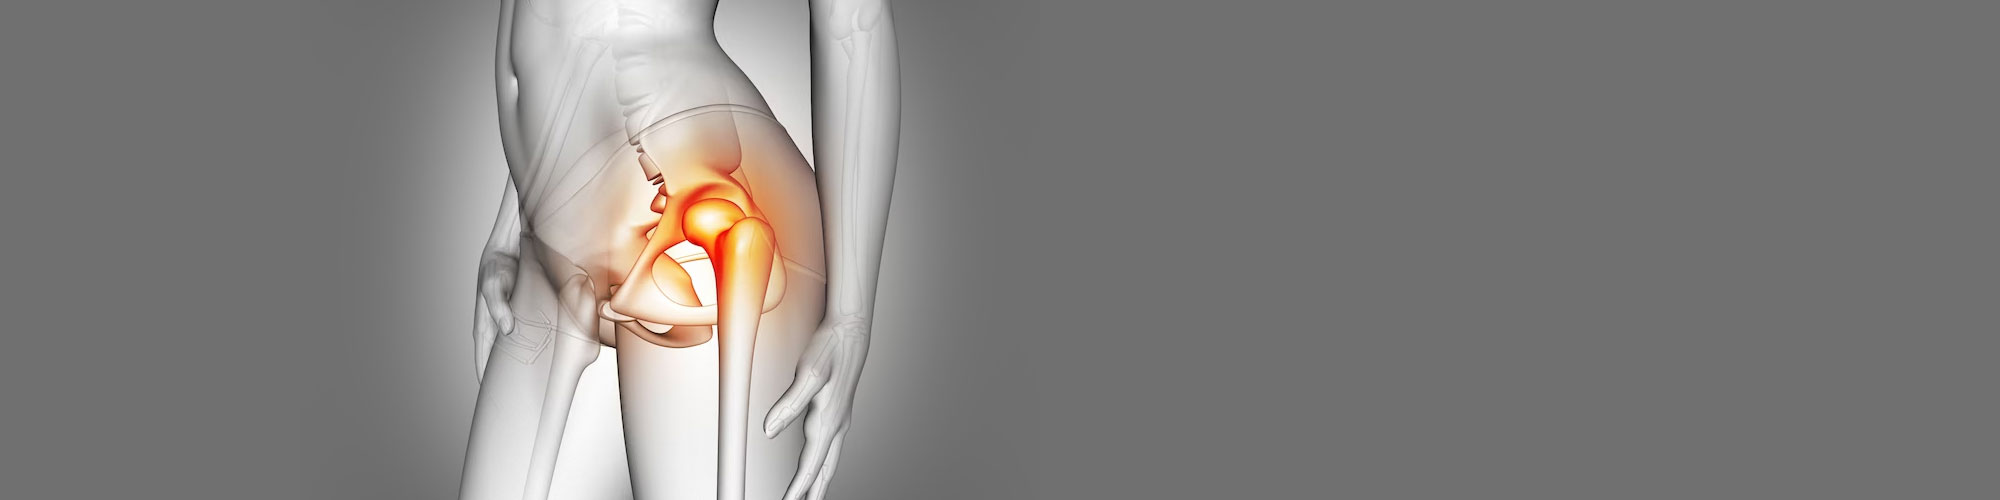 Hip Pain and Other Musculoskeletal Conditions Treatment In Delhi